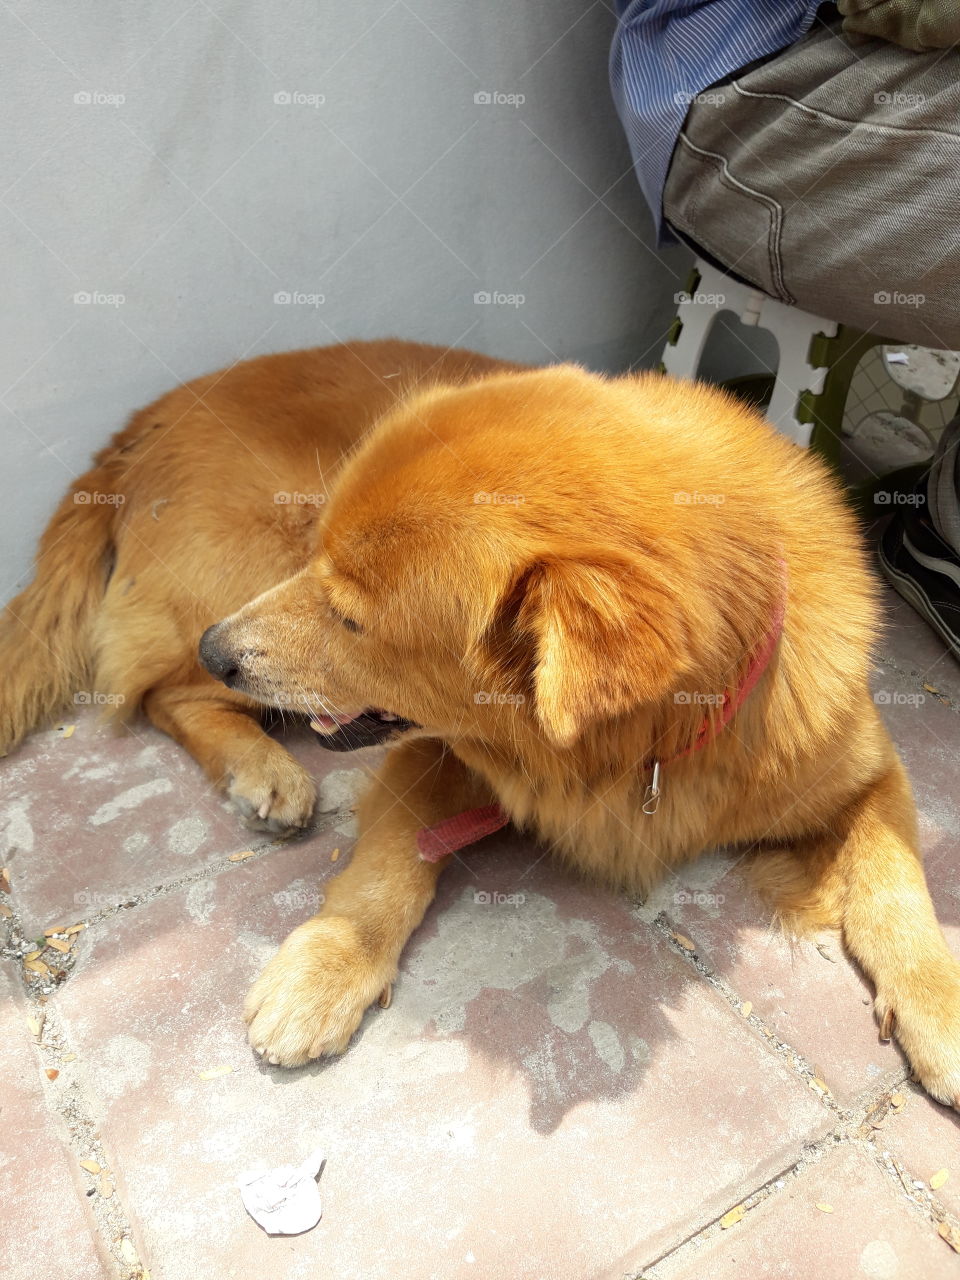 When I met this dog , he can remember me because I take him the food for 2-3 times. And he come to me, I rub gently his head, his face is in front of me but when I pick up my mobile phone to photo him , he will turn away his face to avoid the camera.